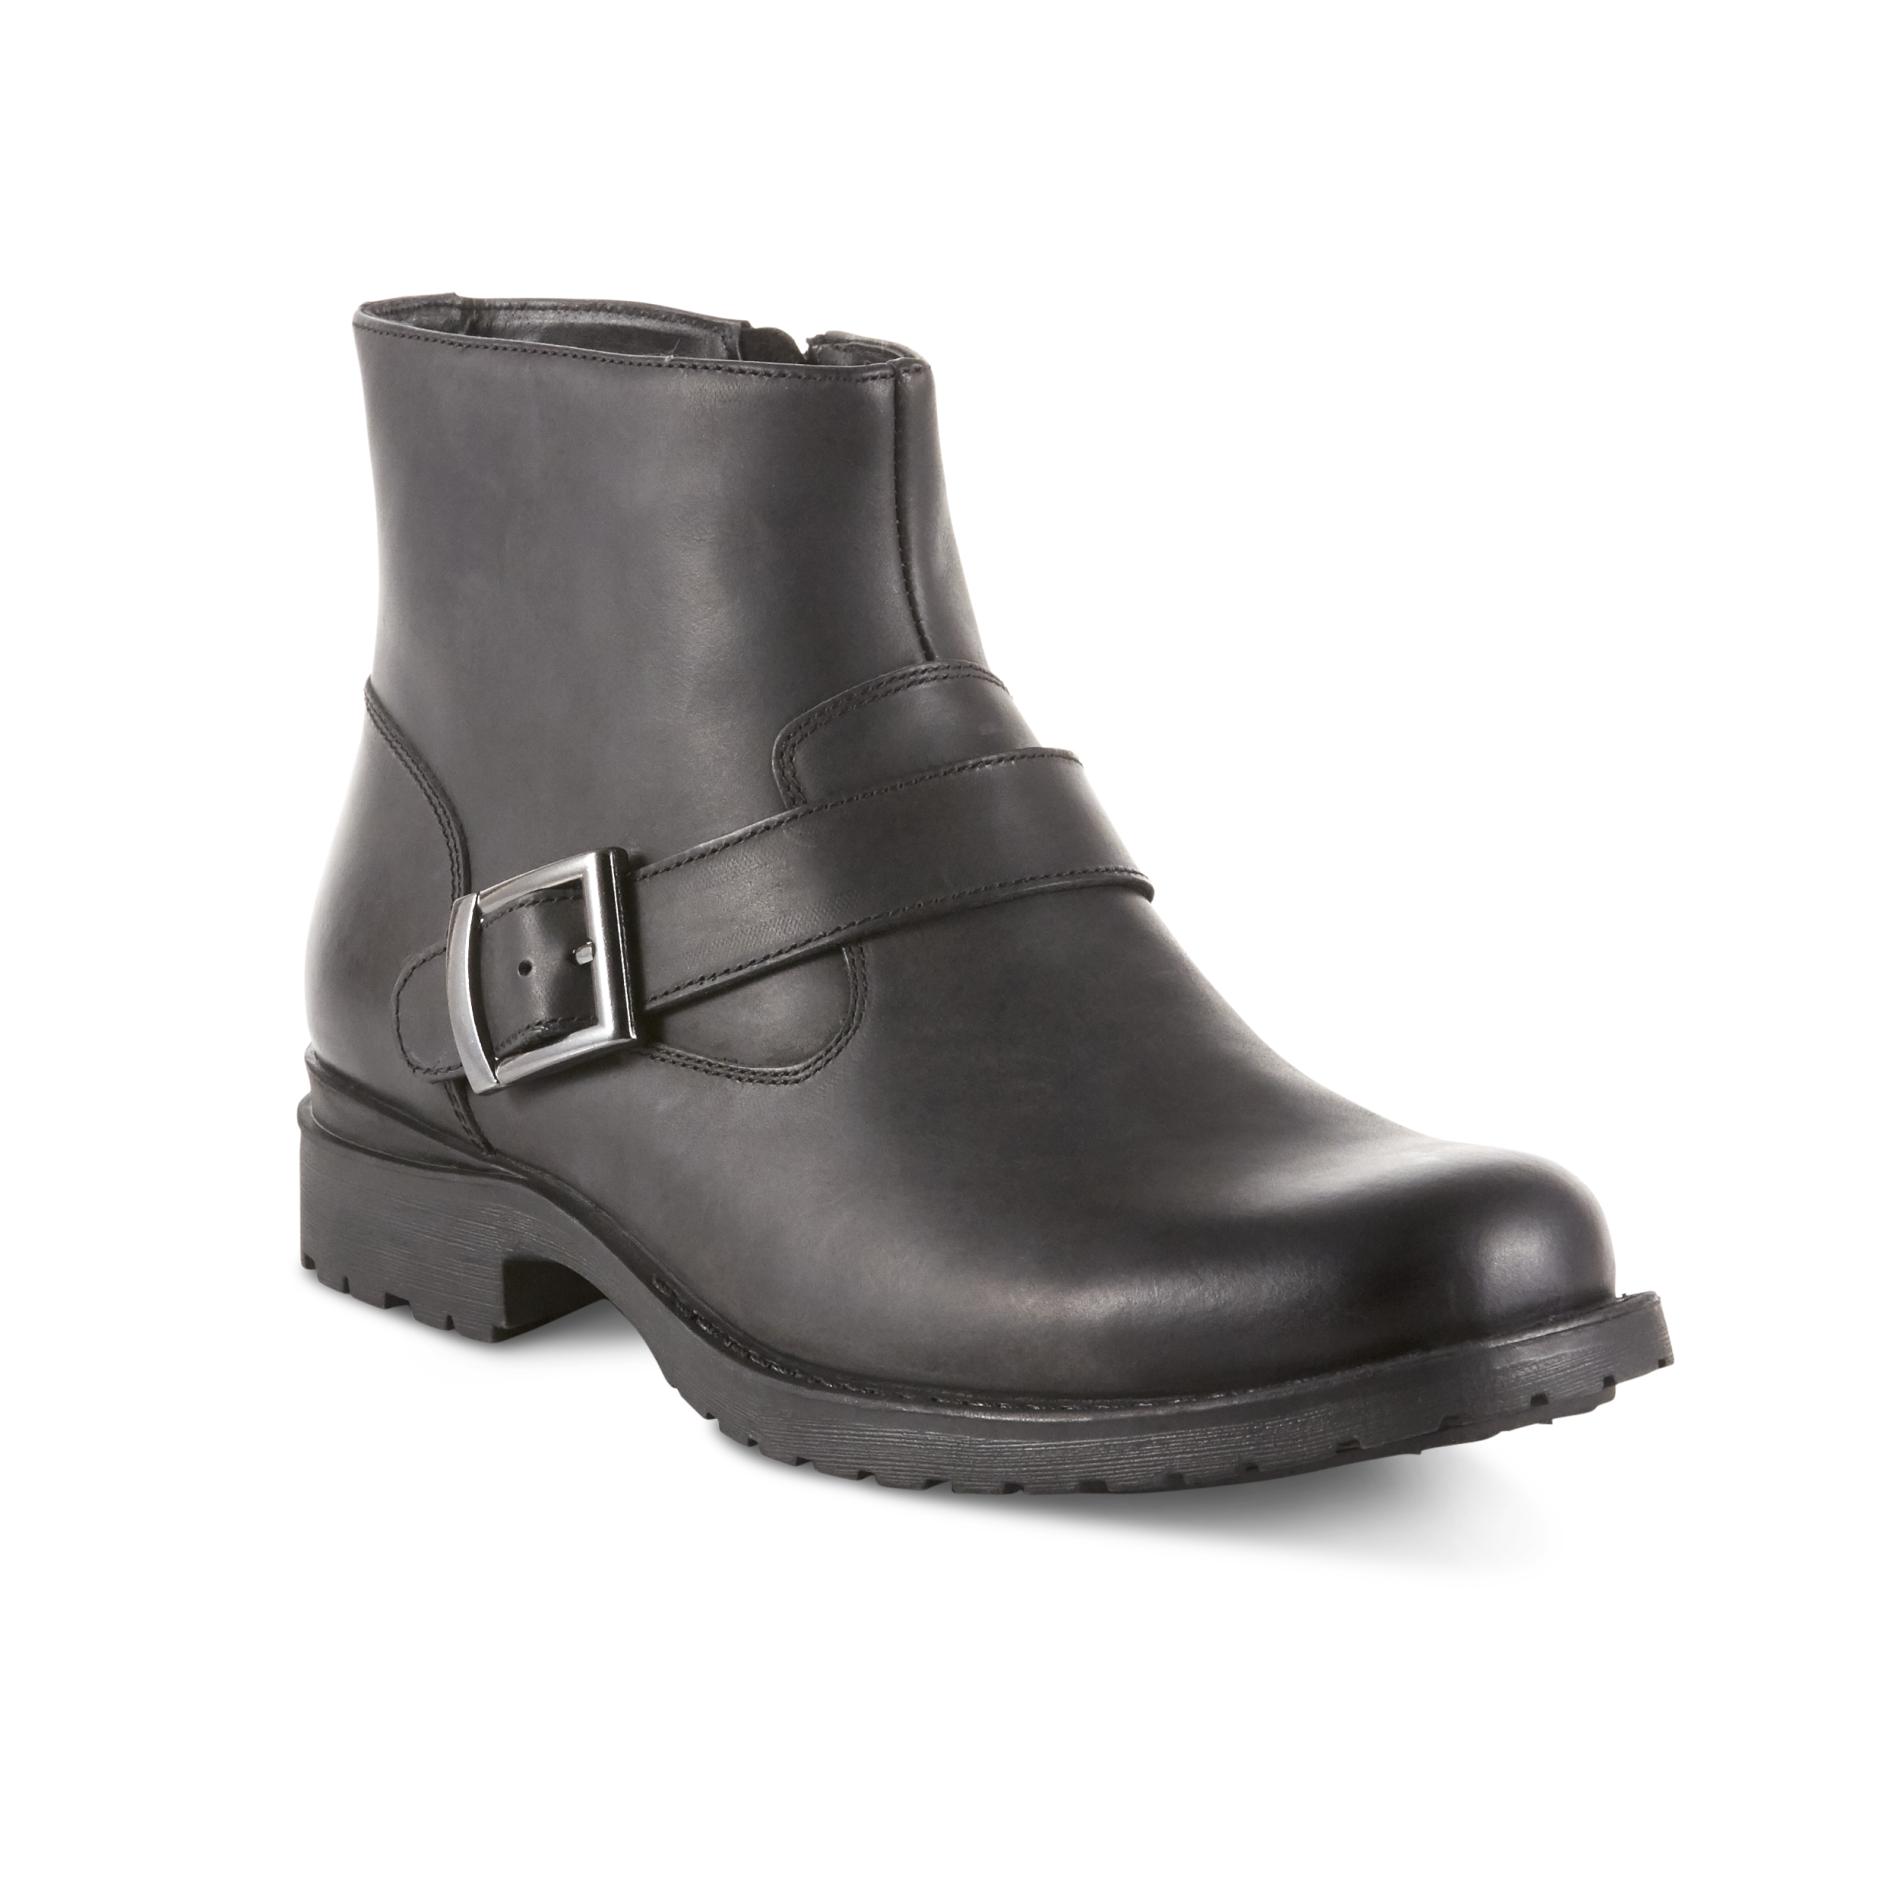 Roebuck & Co. Men's Luther Motorcycle Boot - Black